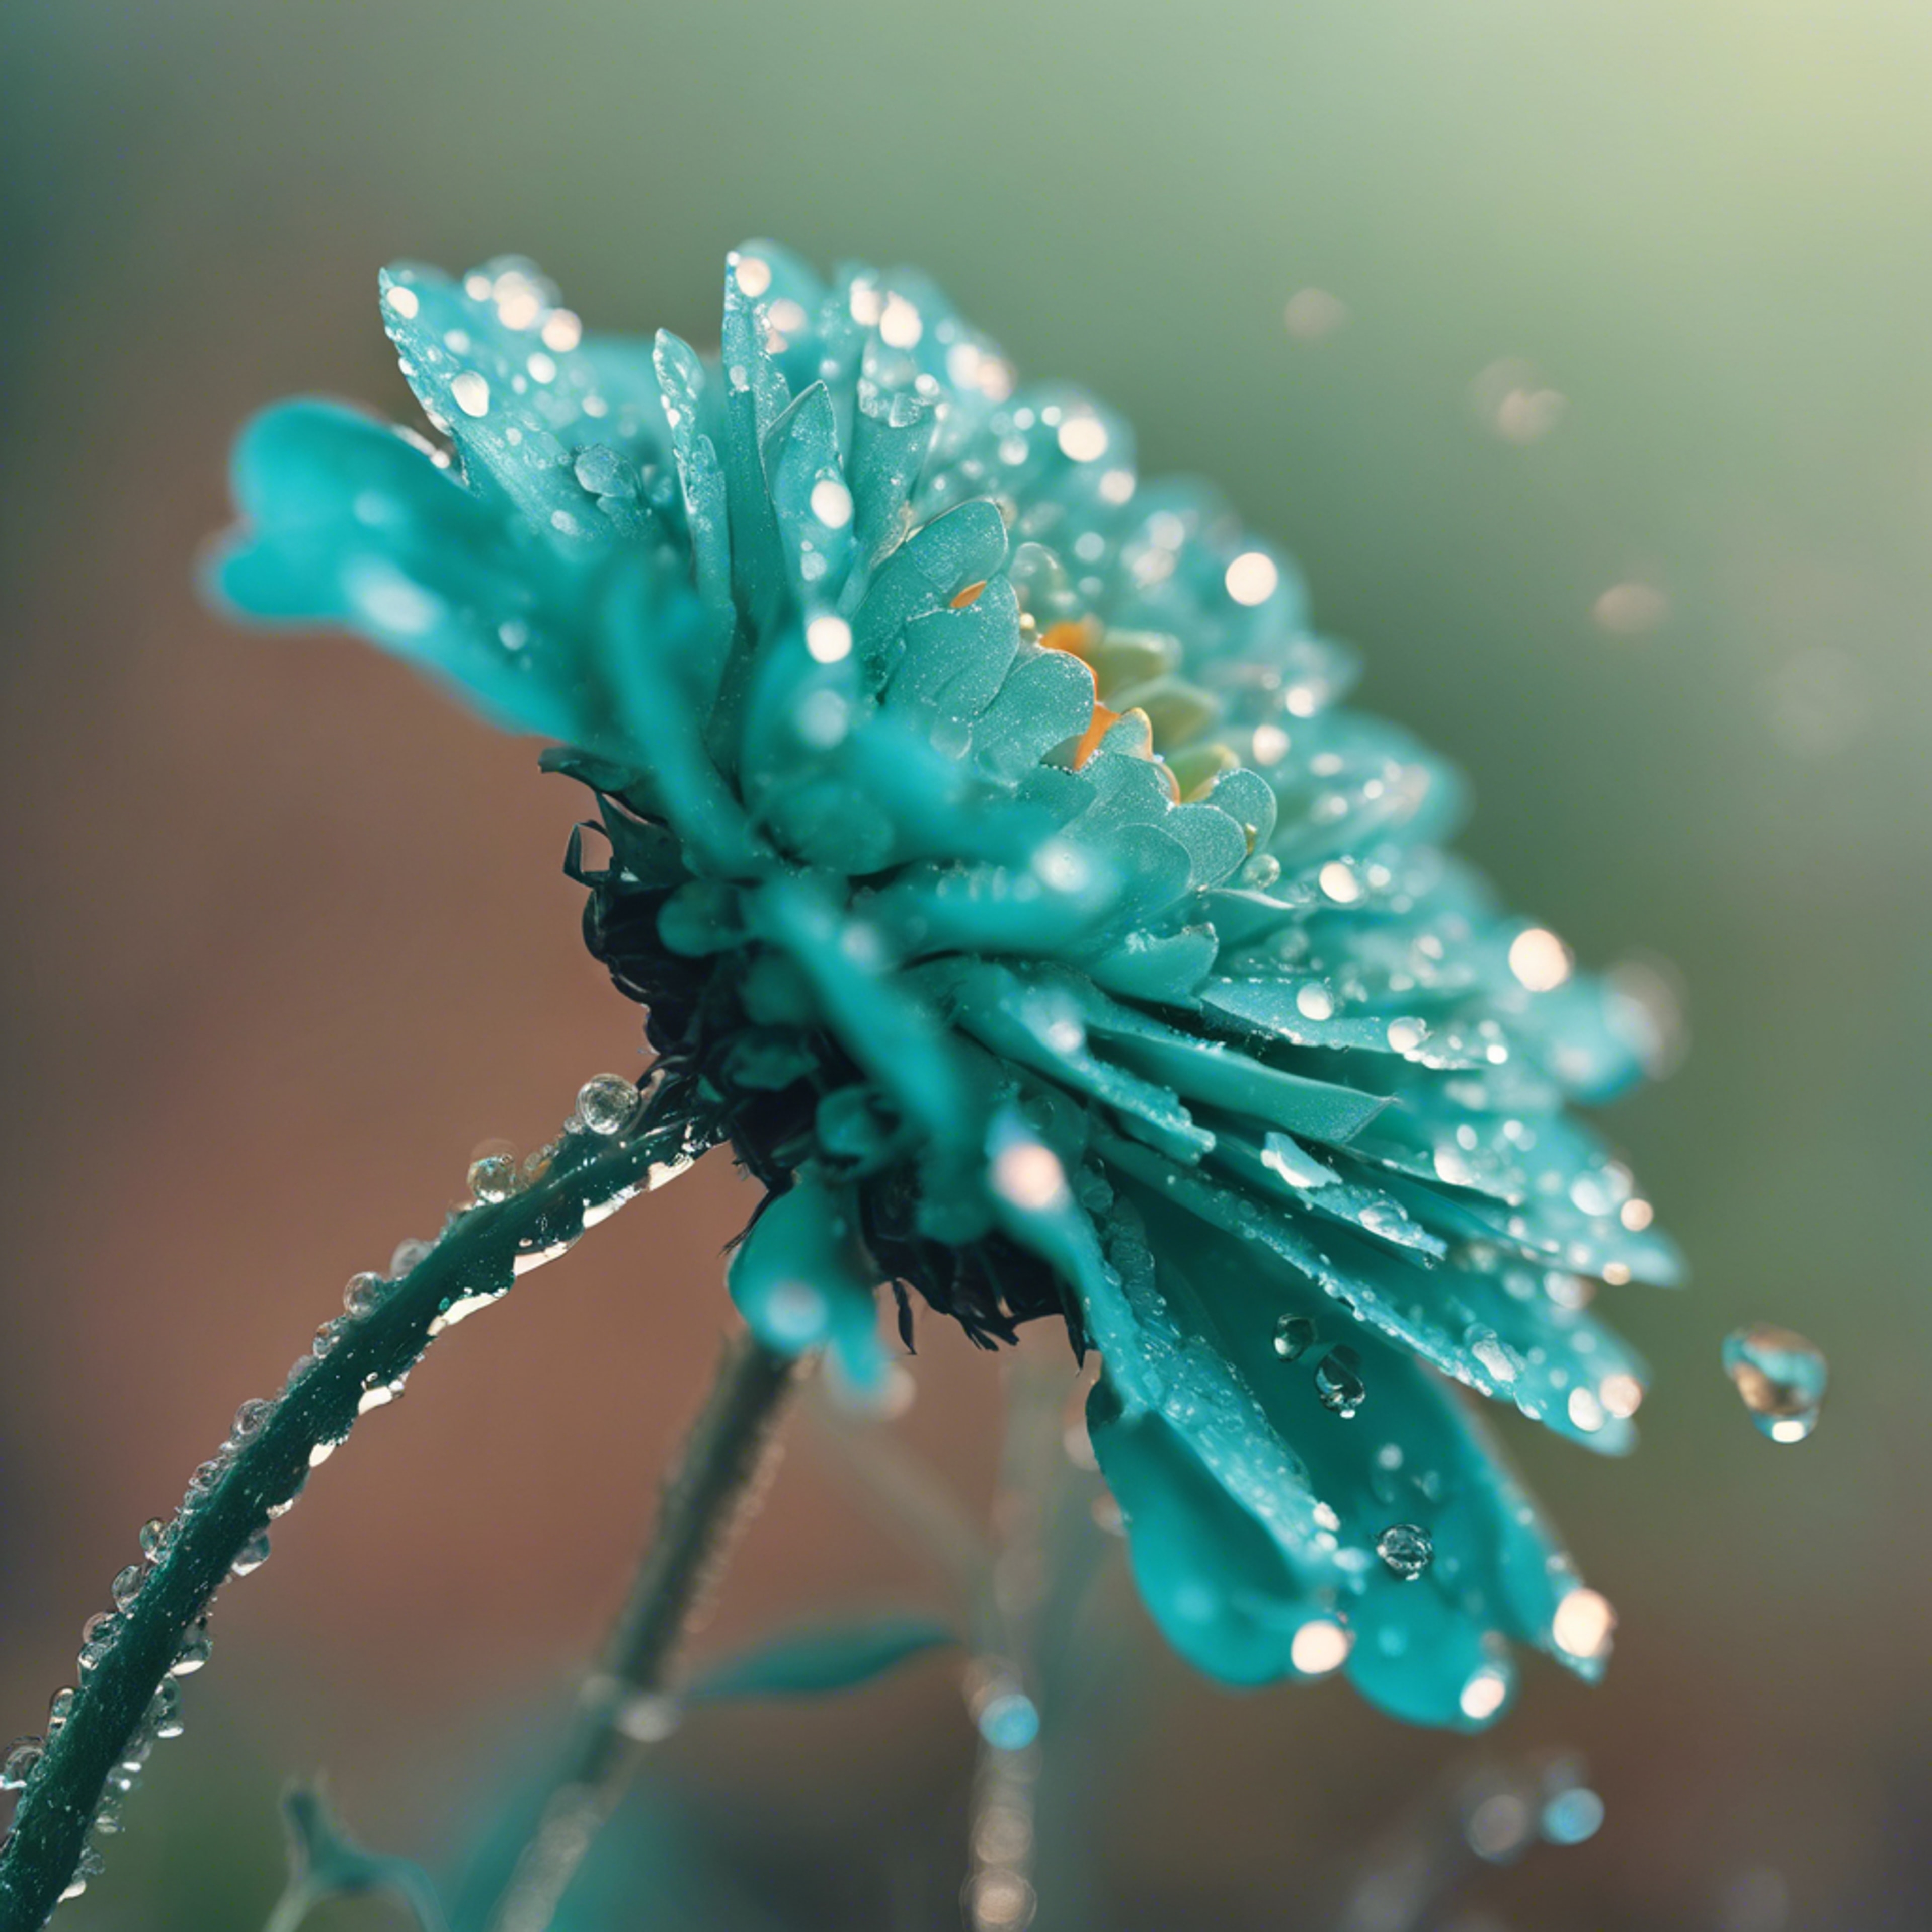 A close perspective of a cool teal colored marigold with morning dew drops.壁紙[8e4cca85e58e470f81c0]